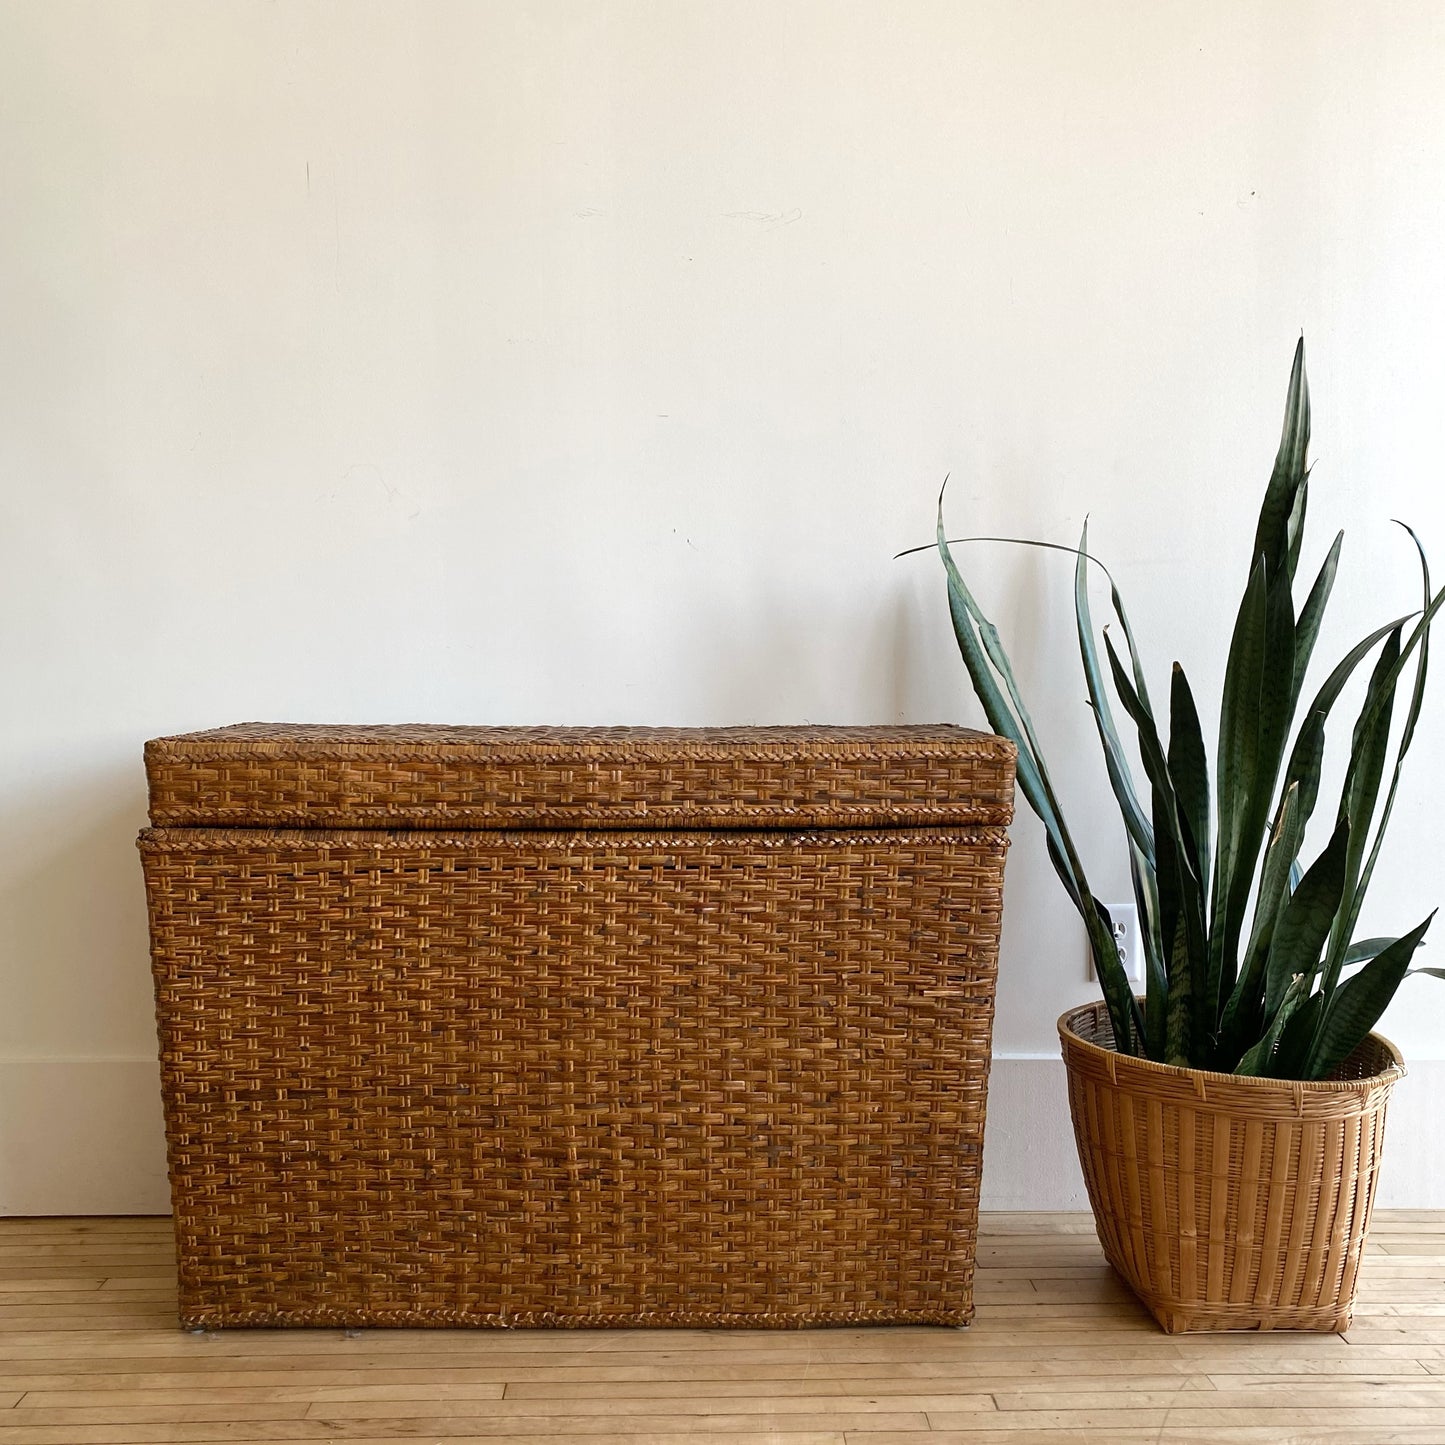 Found Oversized Wicker Chest / Lidded Basket / Console Table